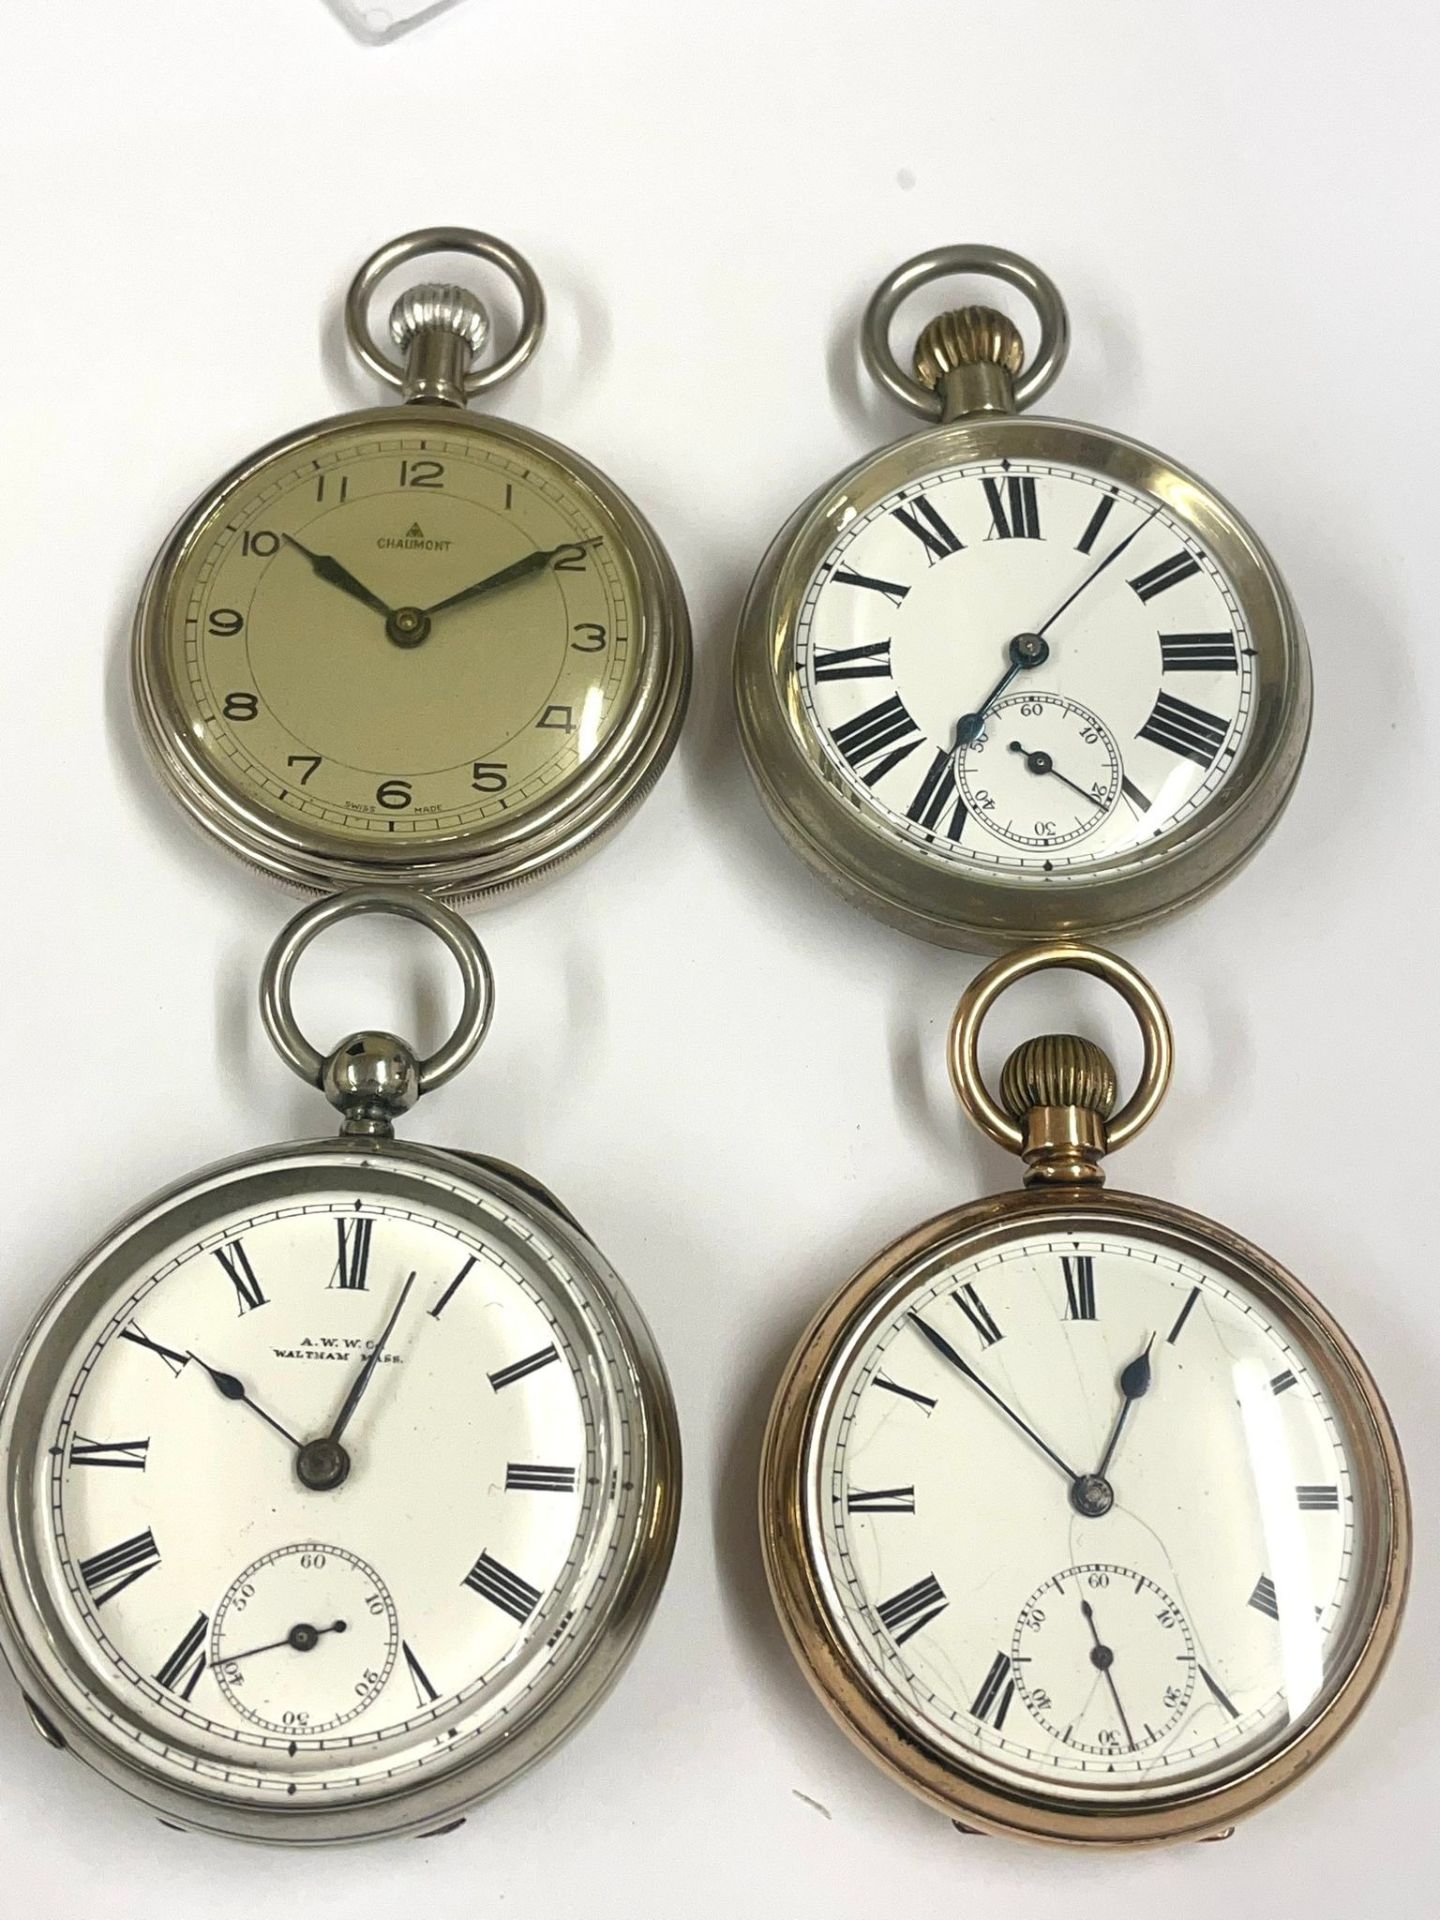 Gents vintage & antique pocket watches include Waltham etc 2 ticking , sold as found